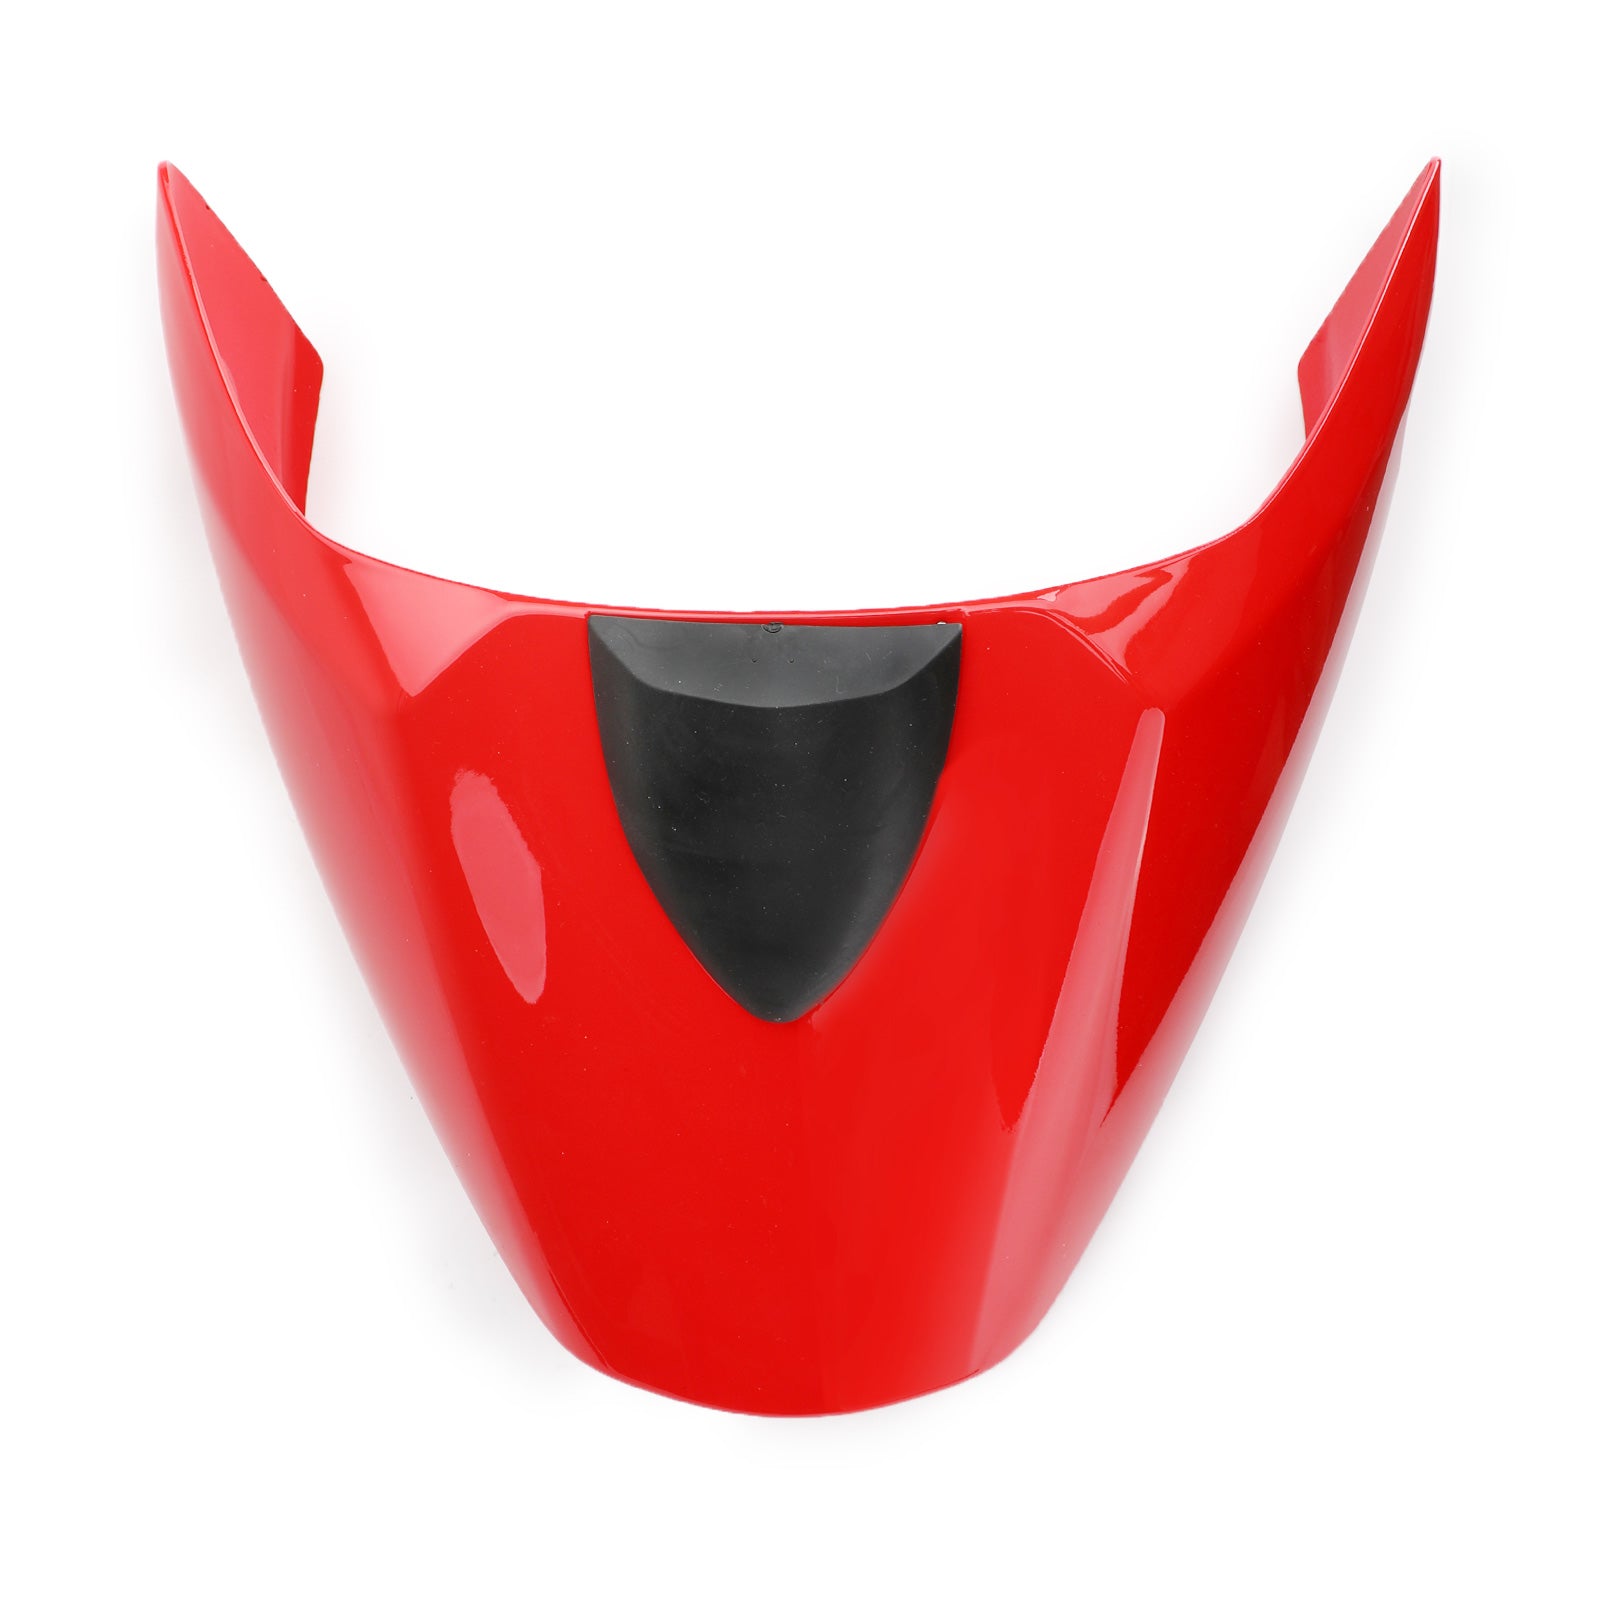 All Years DUCATI 796 795 M1100 696 Red Motorcycle Rear Seat Fairing Cover Cowl